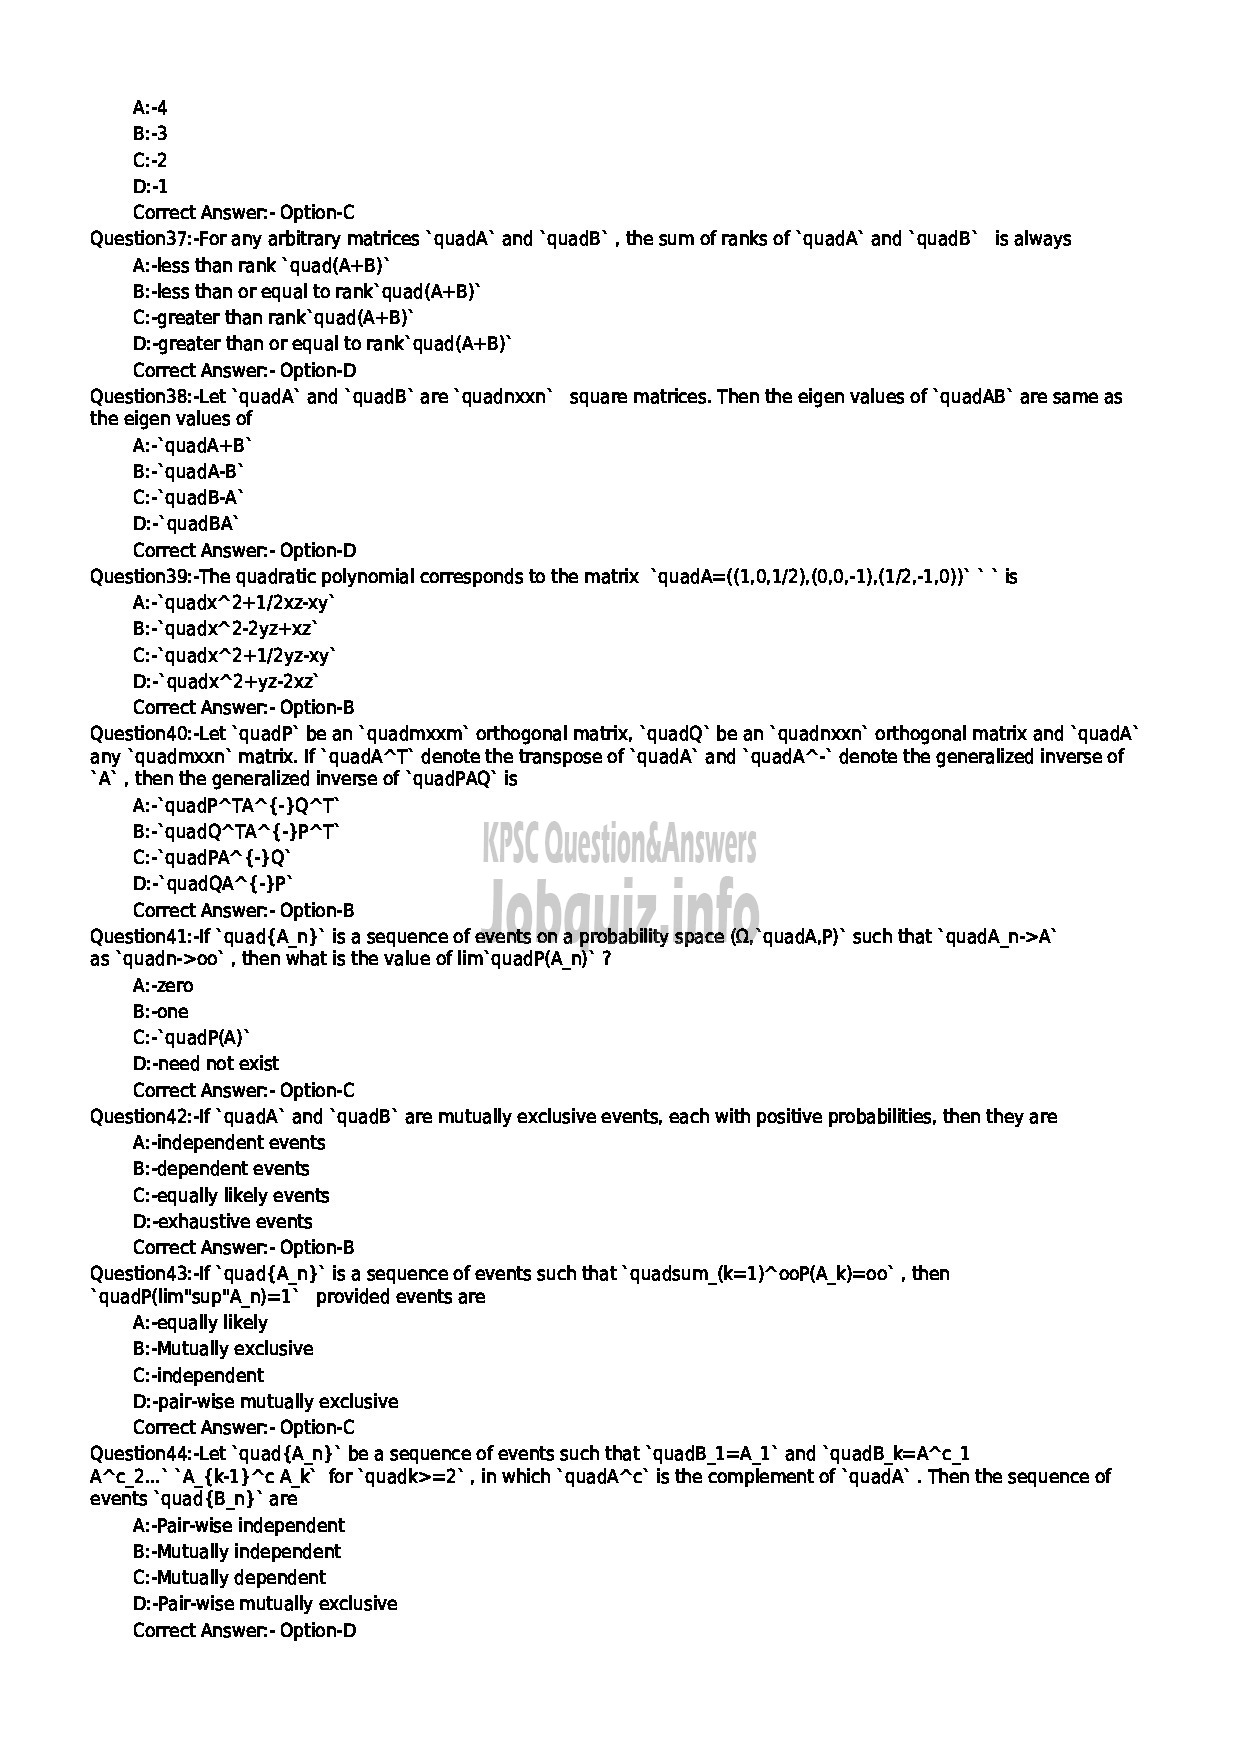 Kerala PSC Question Paper - HSST STATISTICS SR FOR SC / ST AND ST ONLY KHSE-5